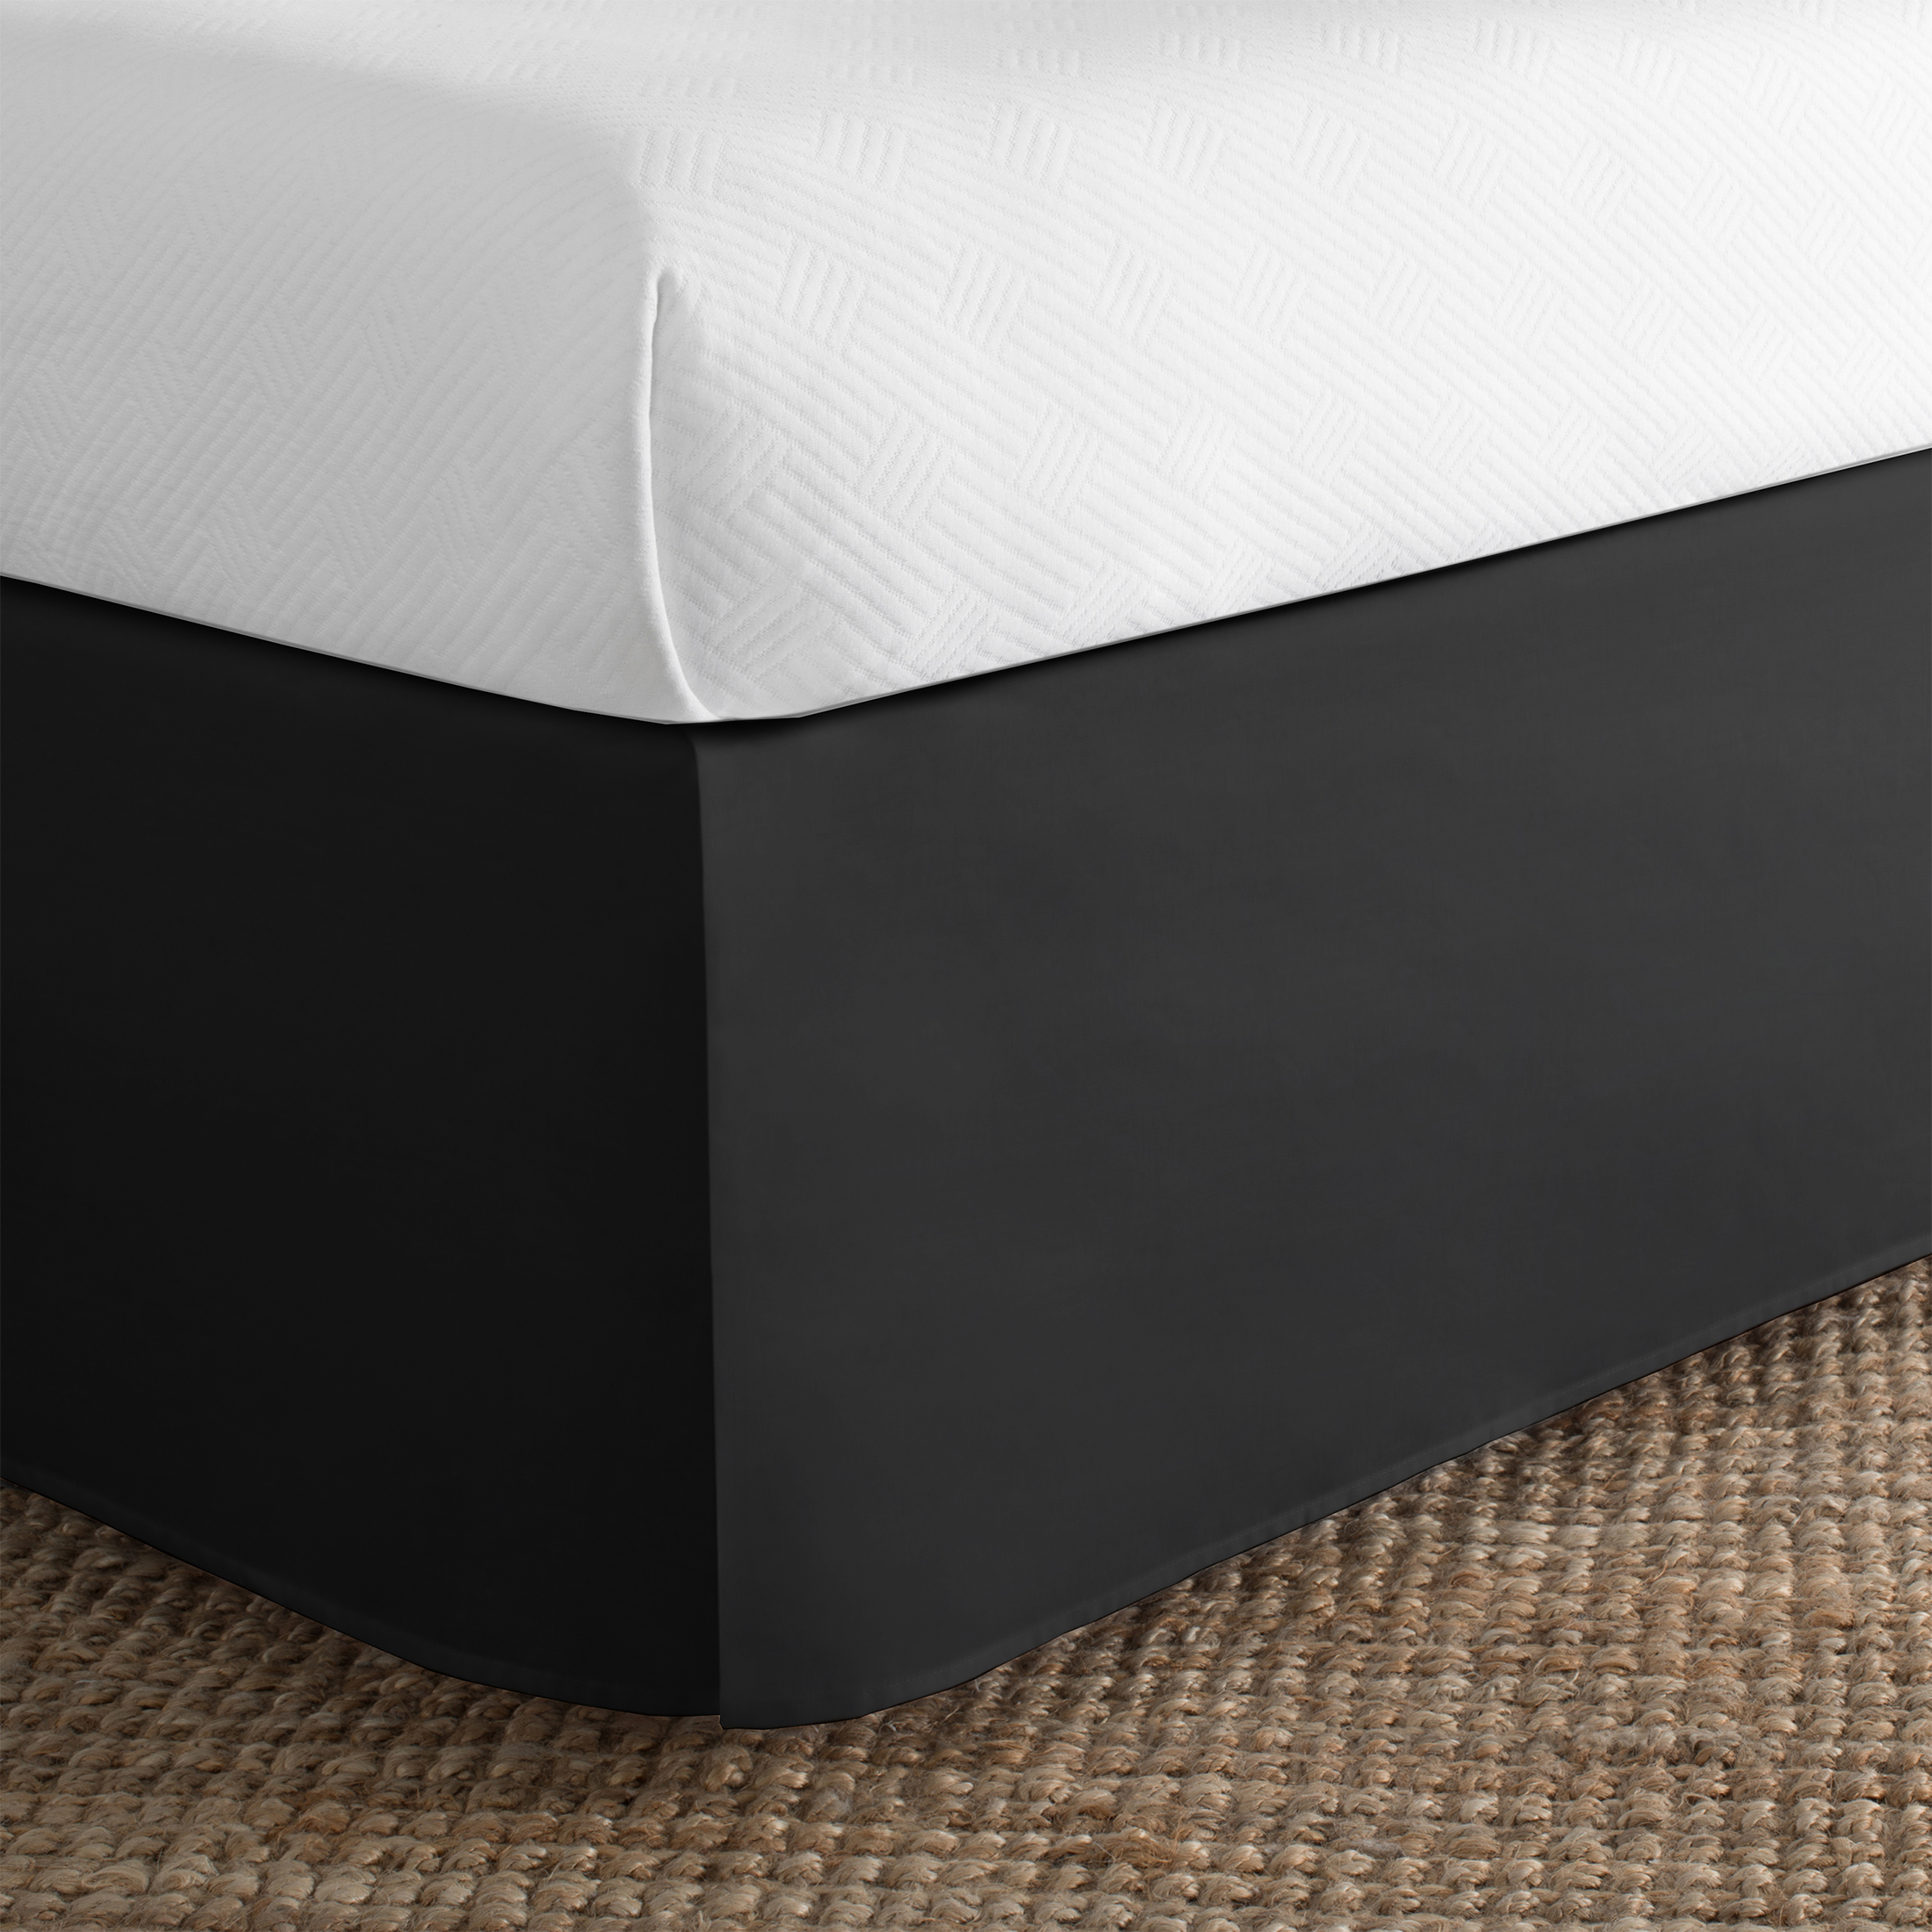 Luxury Hotel Microfiber Tailored Style Bed Skirt with Classic 14 Inch Drop Length, Twin, Black - image 1 of 6